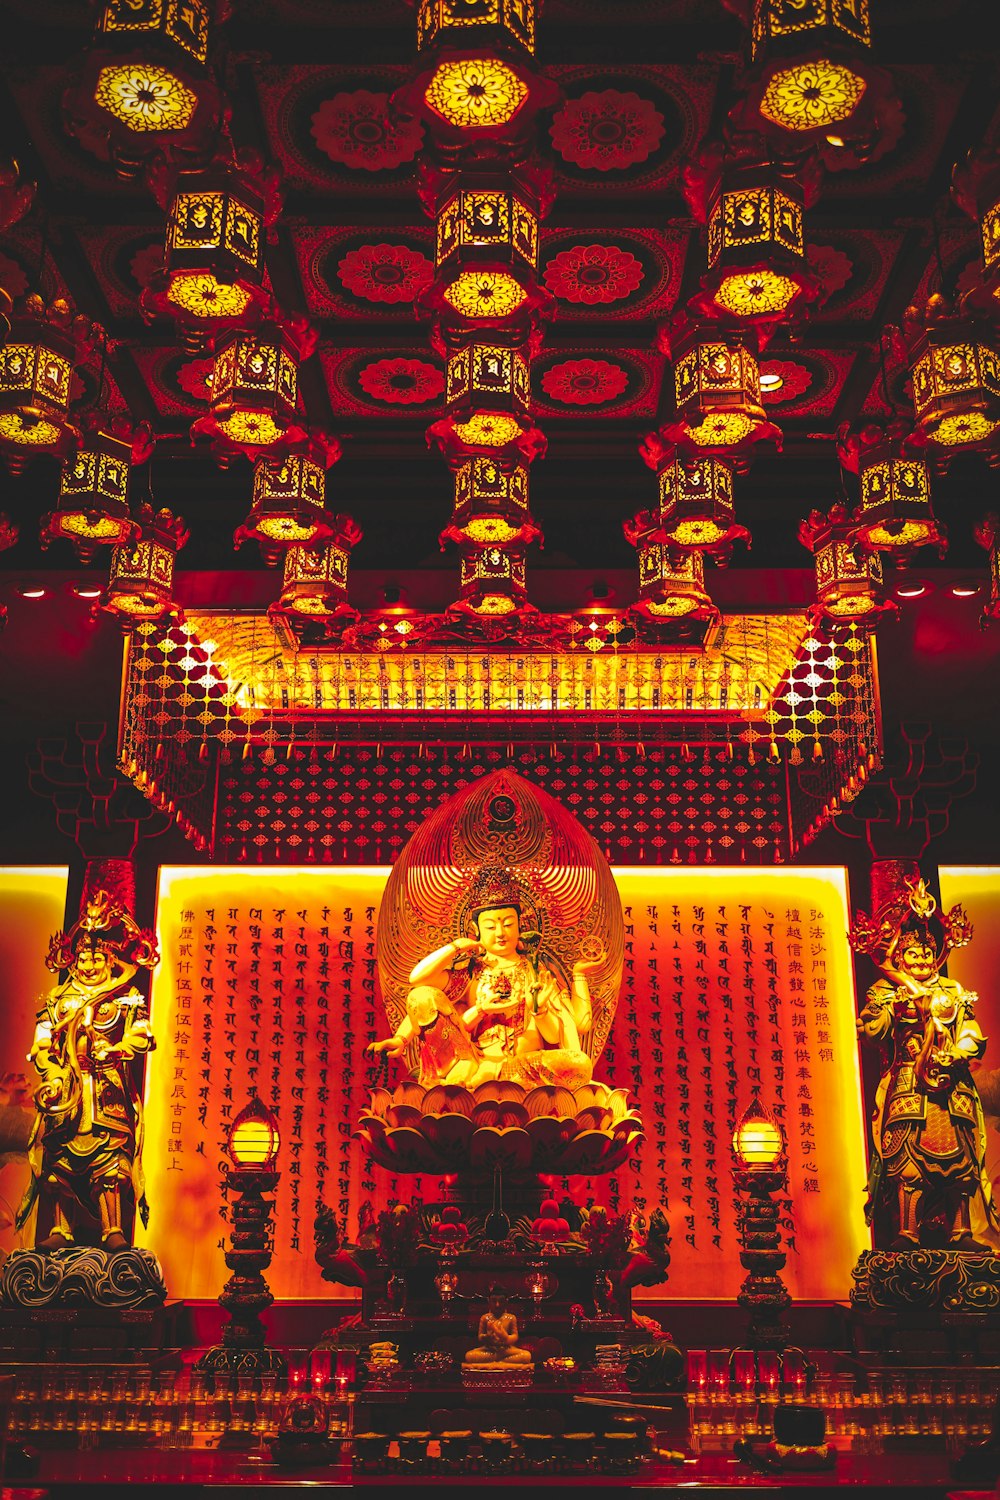 Buddha statues inside building with lights